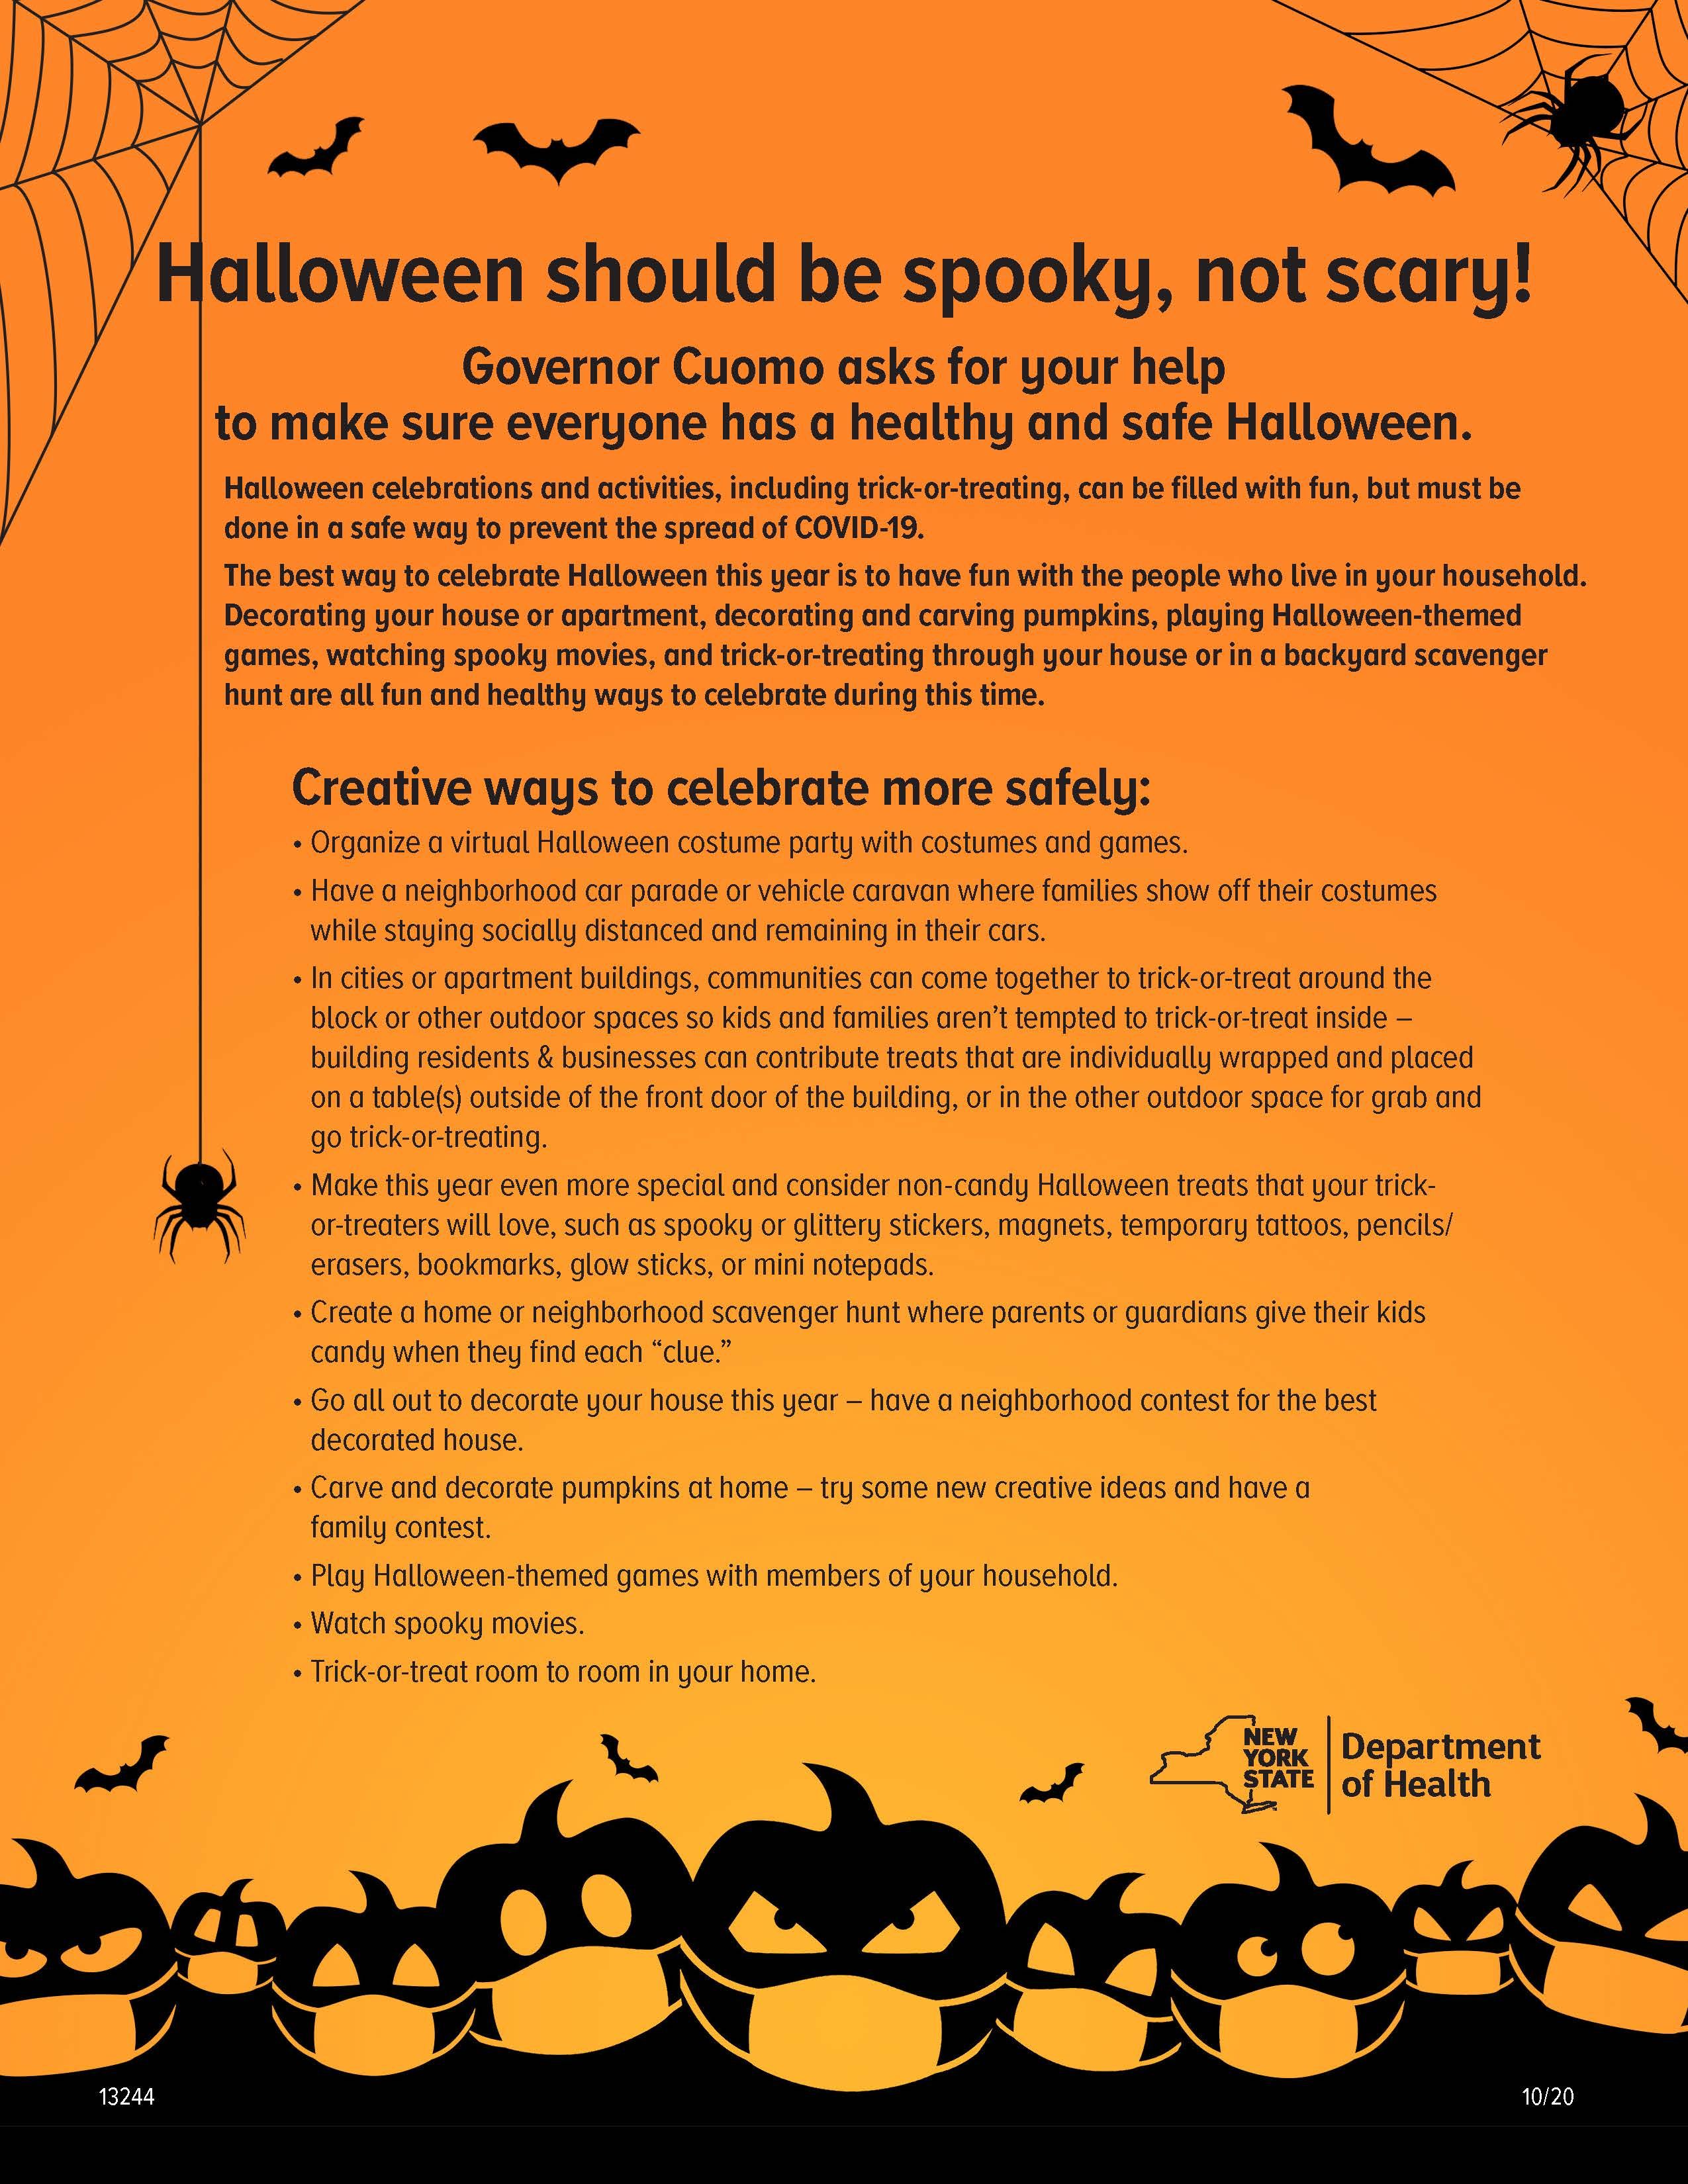 info graphic on how to stay safe when tricker-treating